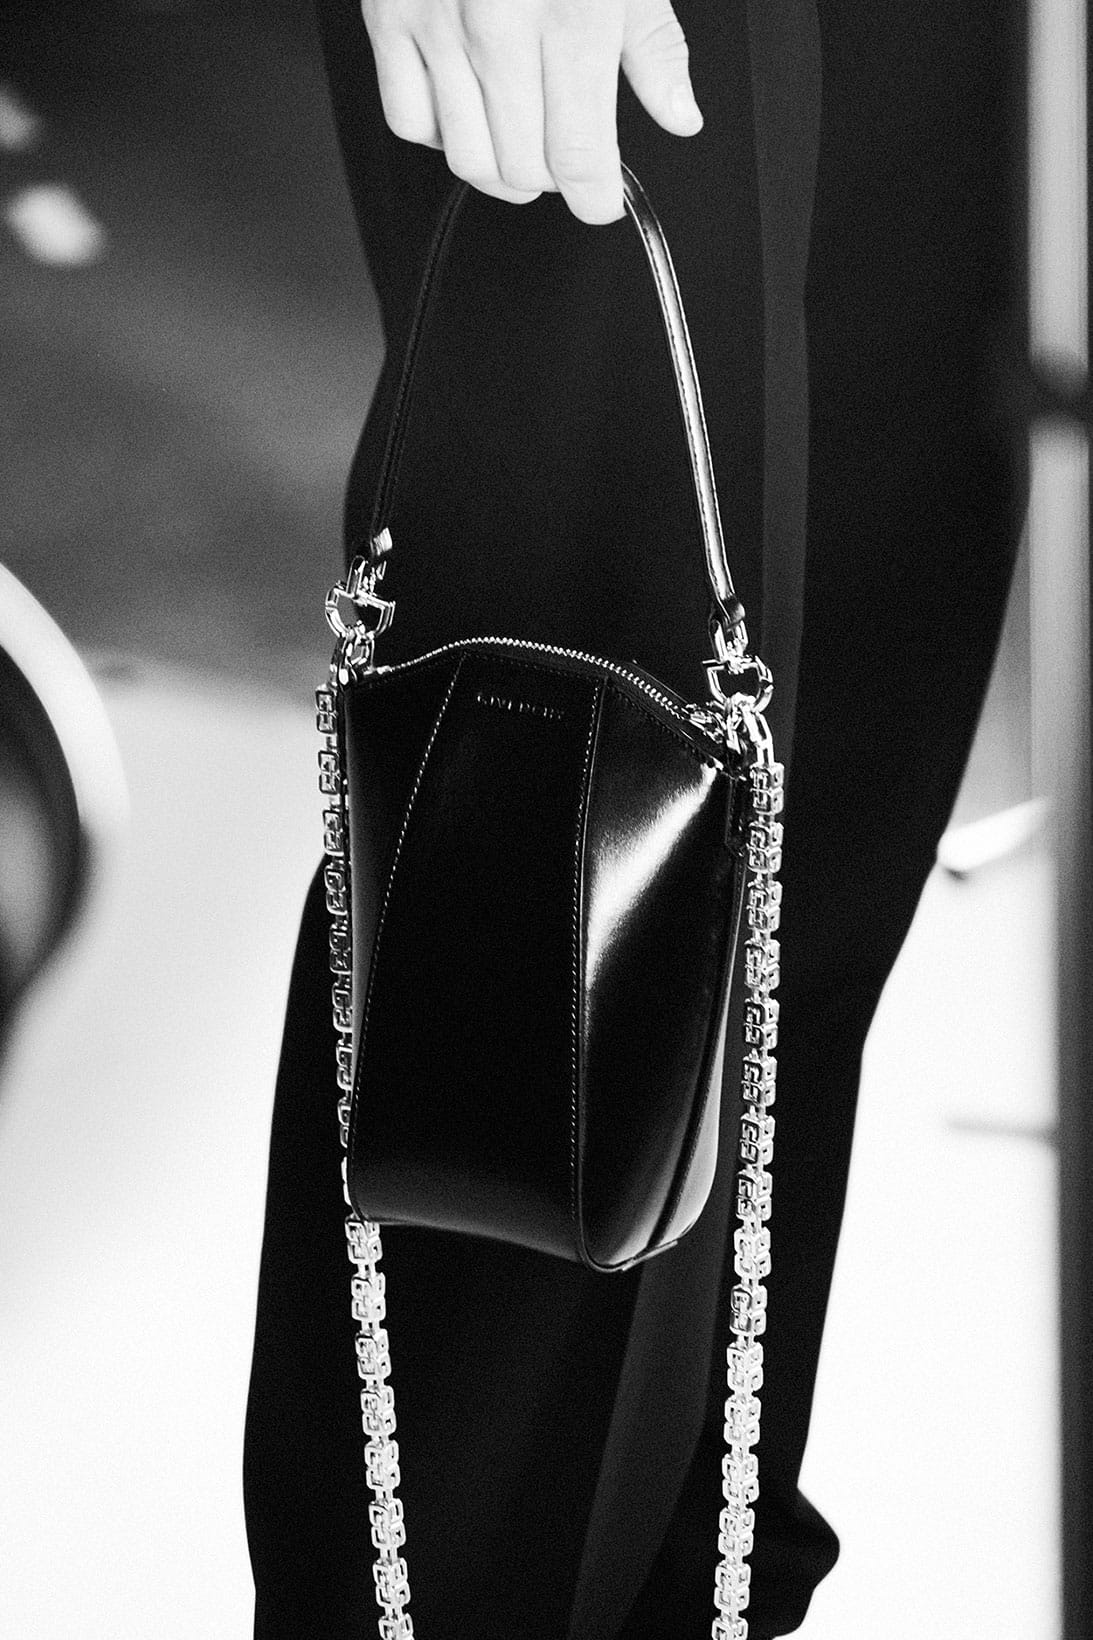 givenchy bag with chain